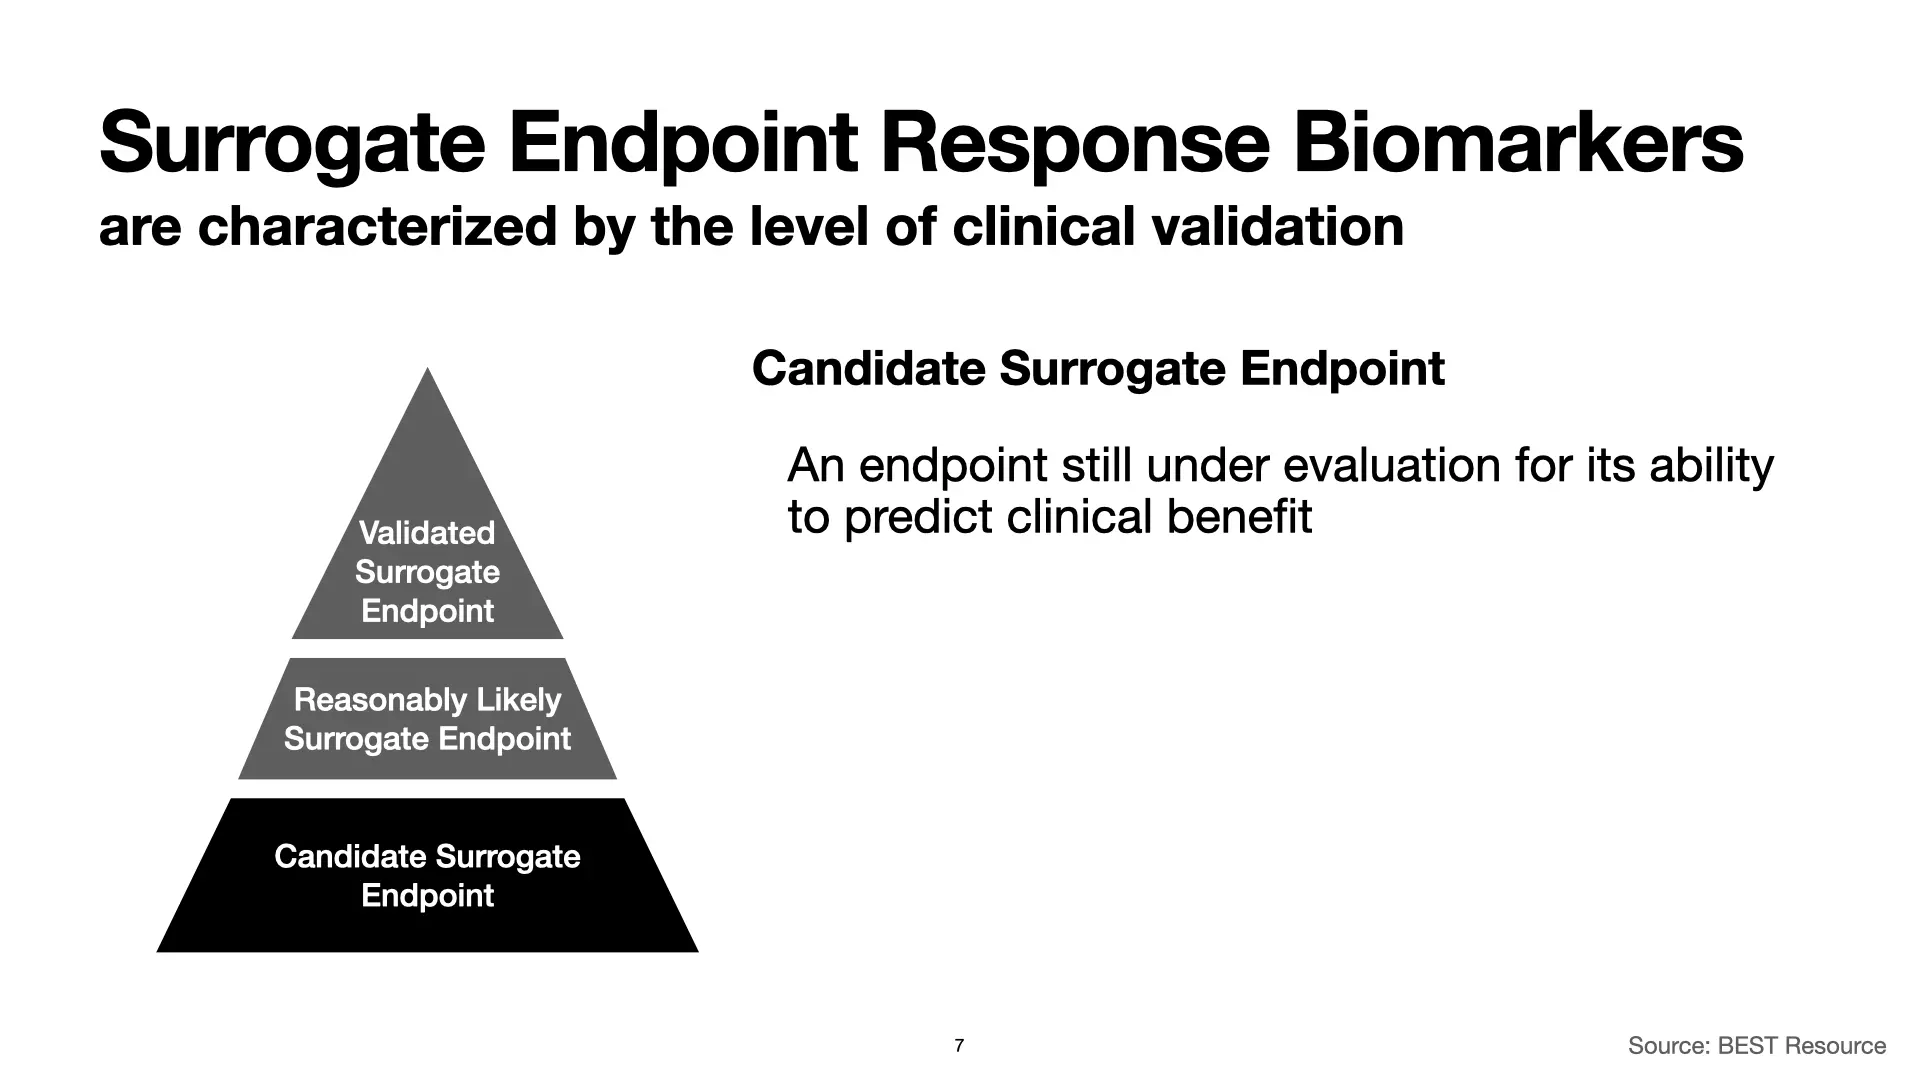 Slide 7: Surrogate Endpoint Response Biomarkers are characterized by the level of clinical validation. The pyramid graphic appears again, with 'Candidate Surrogate Endpoint' highlighted. A 'Candidate Surrogate Endpoint' is an endpoint still under evaluation for its ability to predict clinical benefit.